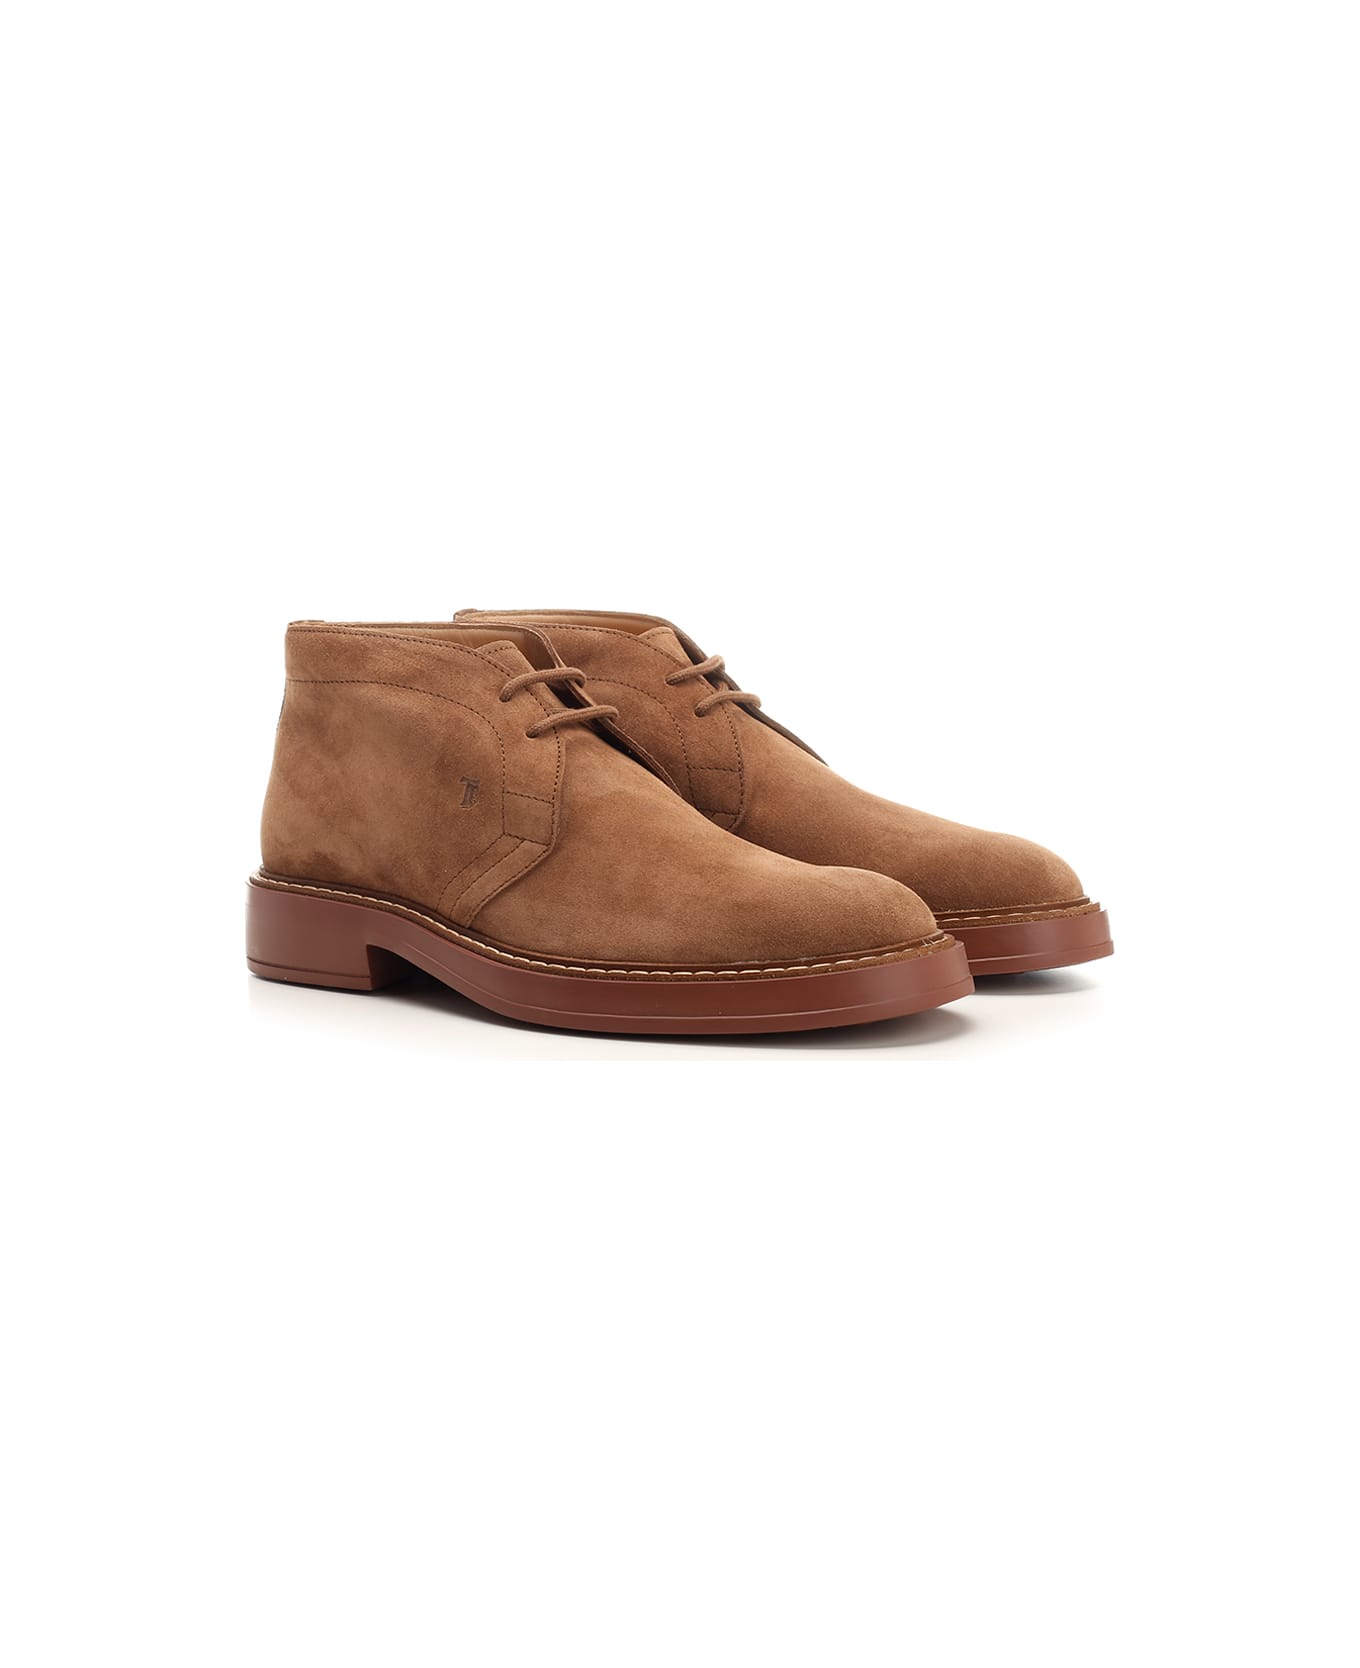 Tod's Suede Ankle Boot - Light Walnut ブーツ